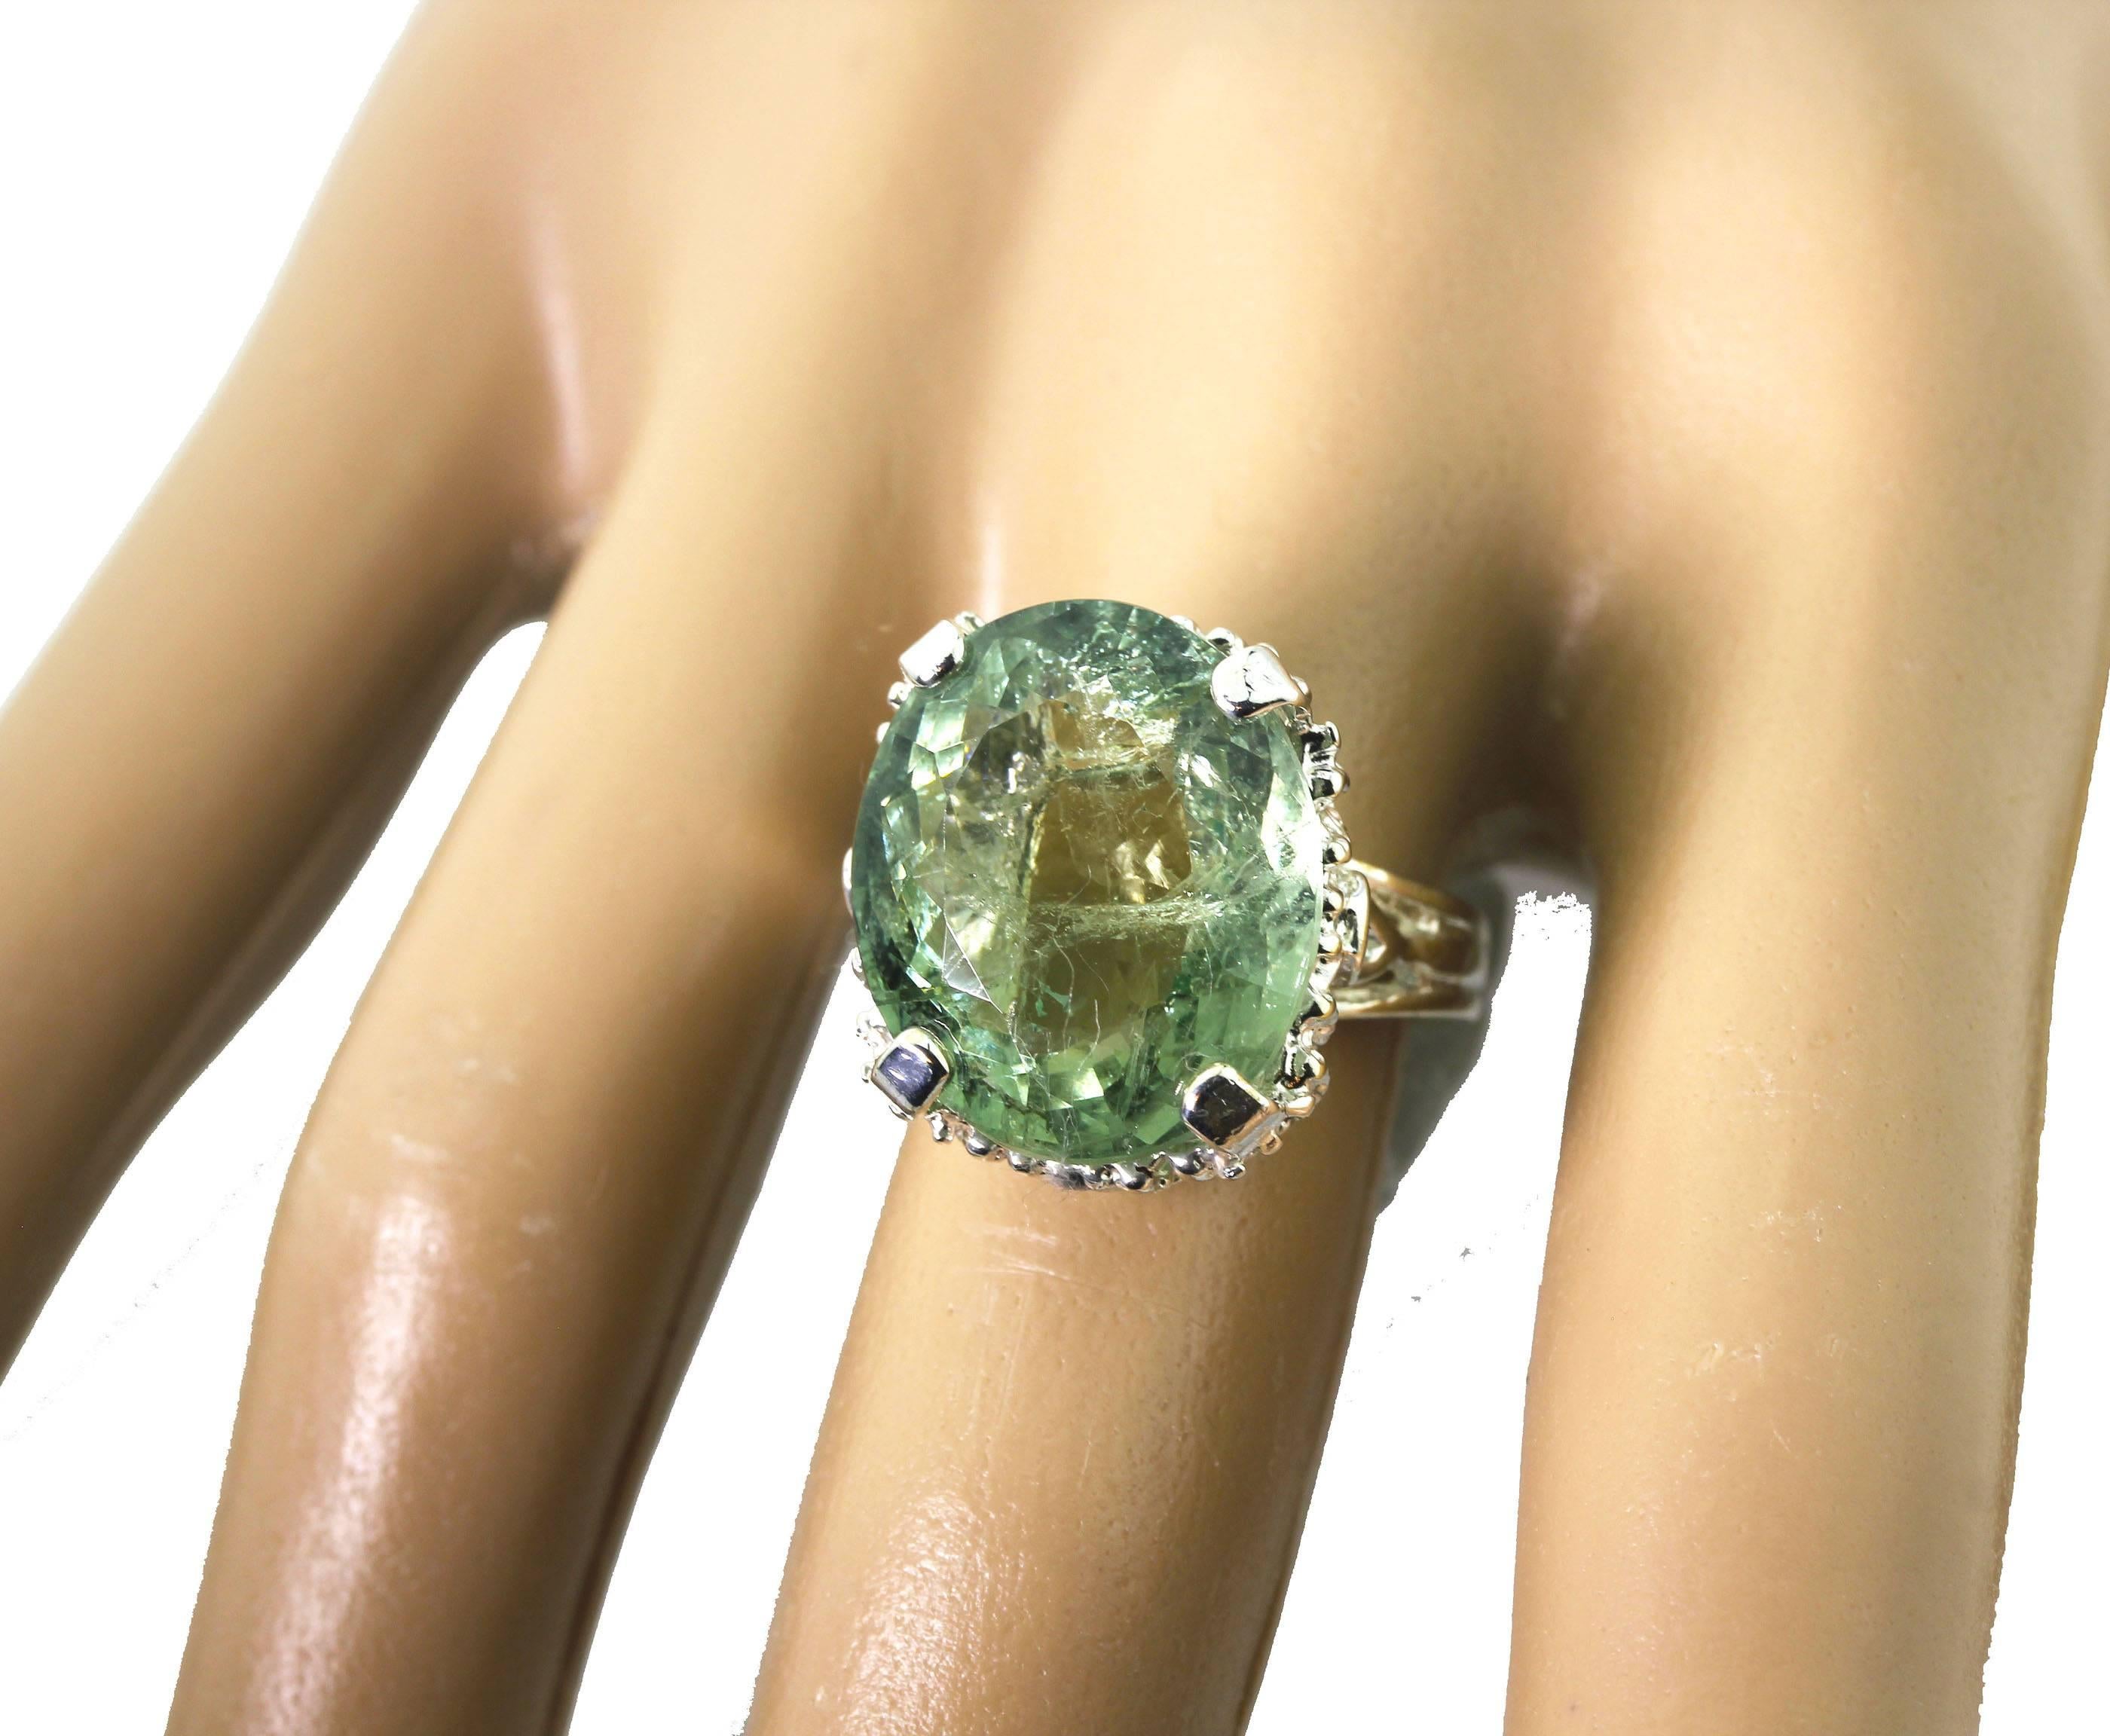 AJD Gorgeous Artistic Huge Spectacular 14.98 Cts Green Tourmaline Ring 3